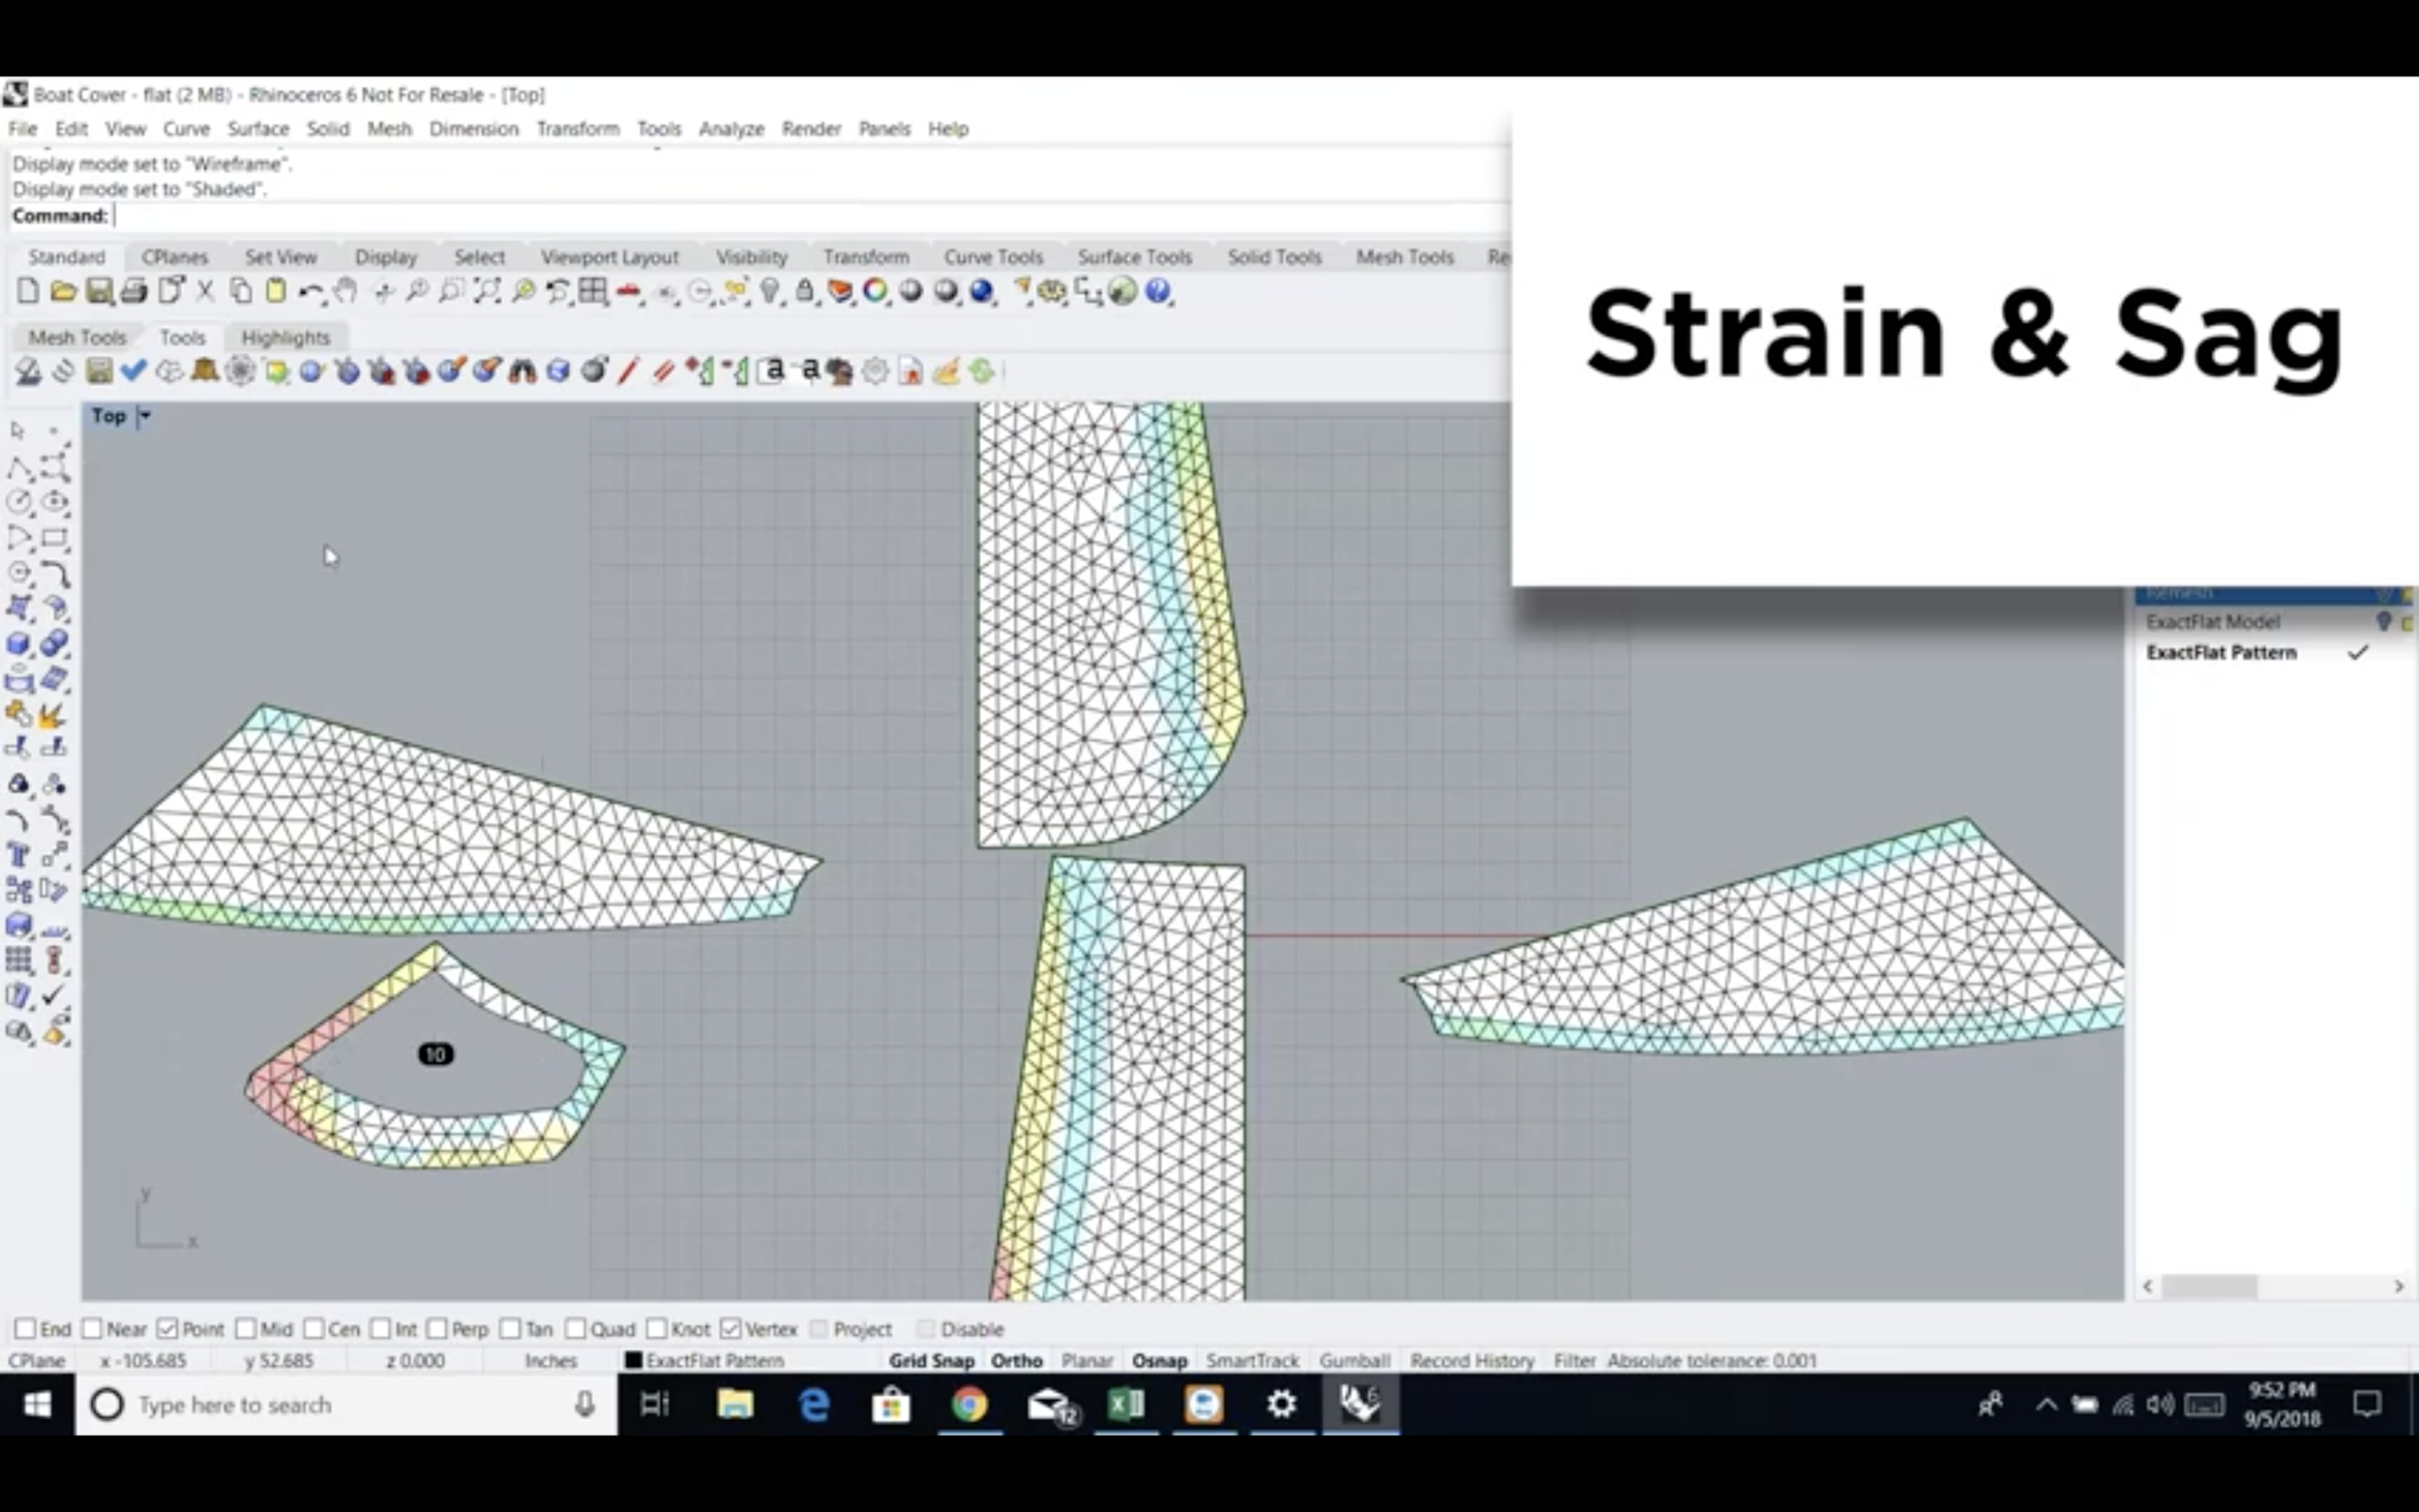 Best Practices  in Marine Canvas Fabrication Using ExactFlat 3D to 2D Digital Patterning: The Strain and sag analysis